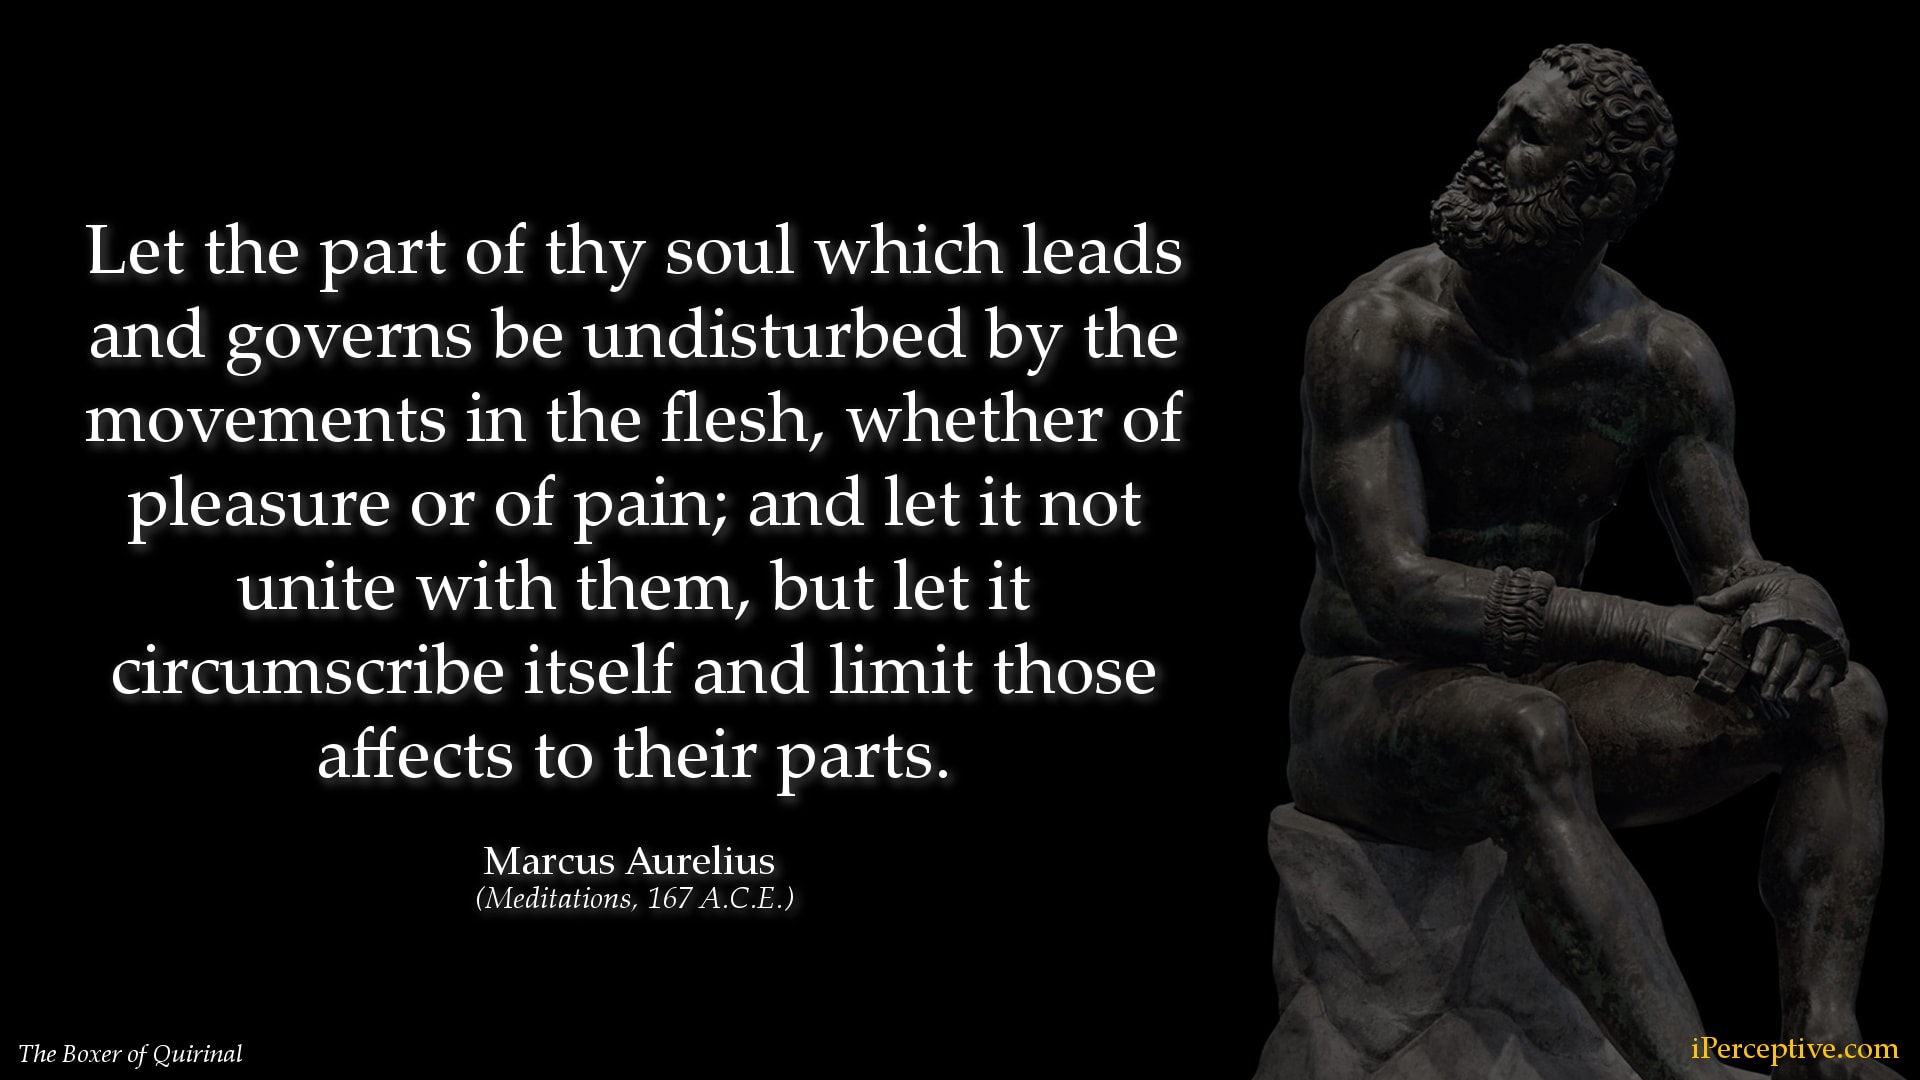 Marcus Aurelius Stoic Quote: Let the part of thy soul which leads and governs be undisturbed by the...